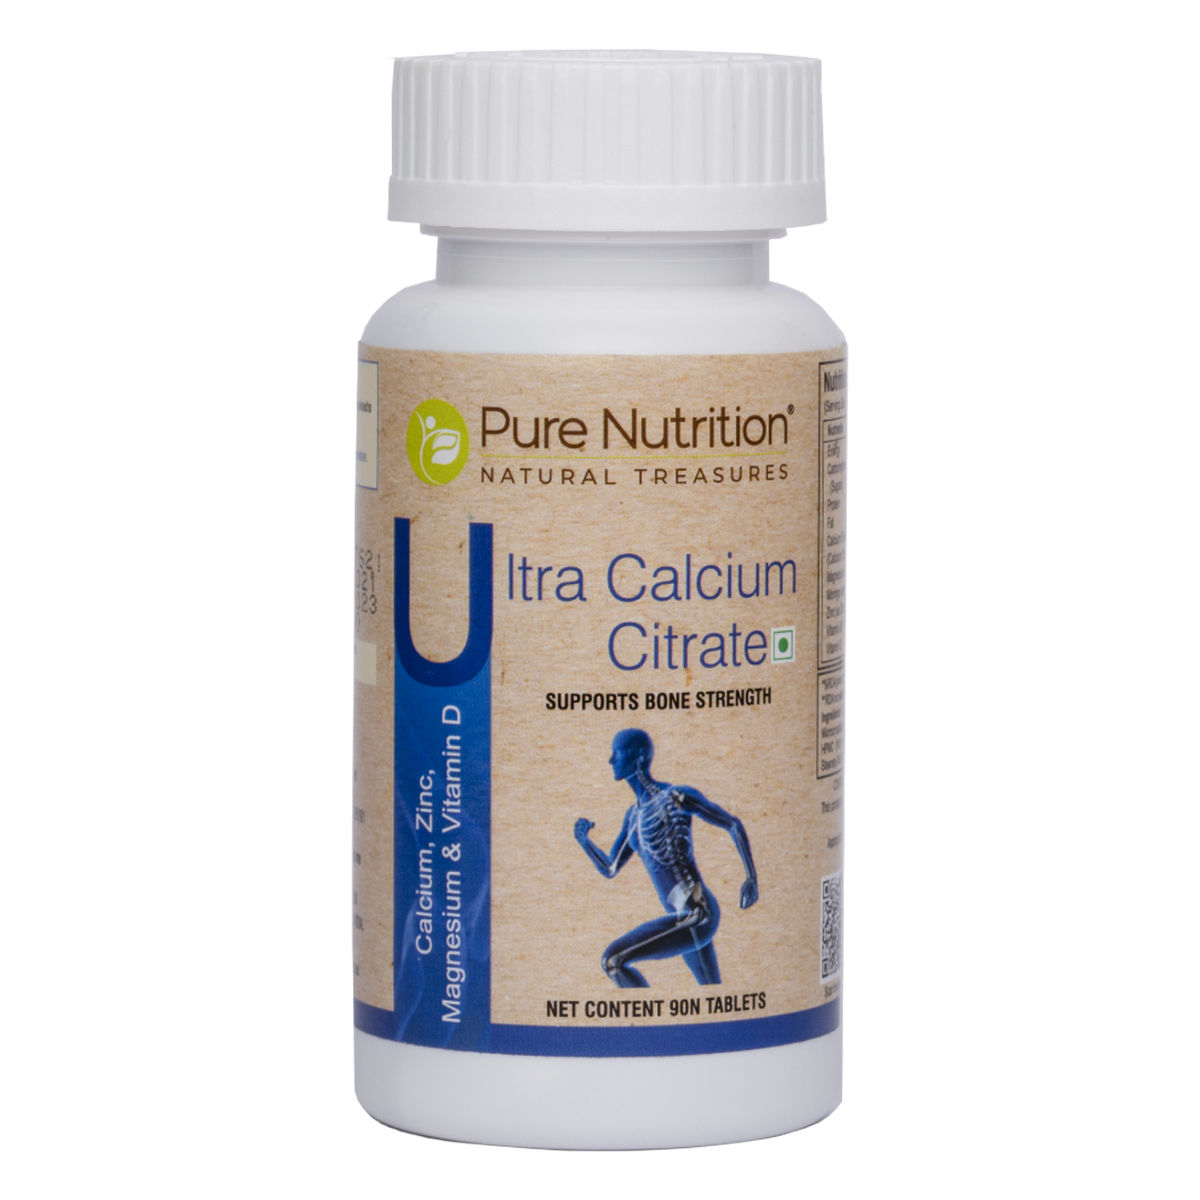 Buy Pure Nutrition Ultra Calcium Citrate 1250 mg, 90 Tablets Online